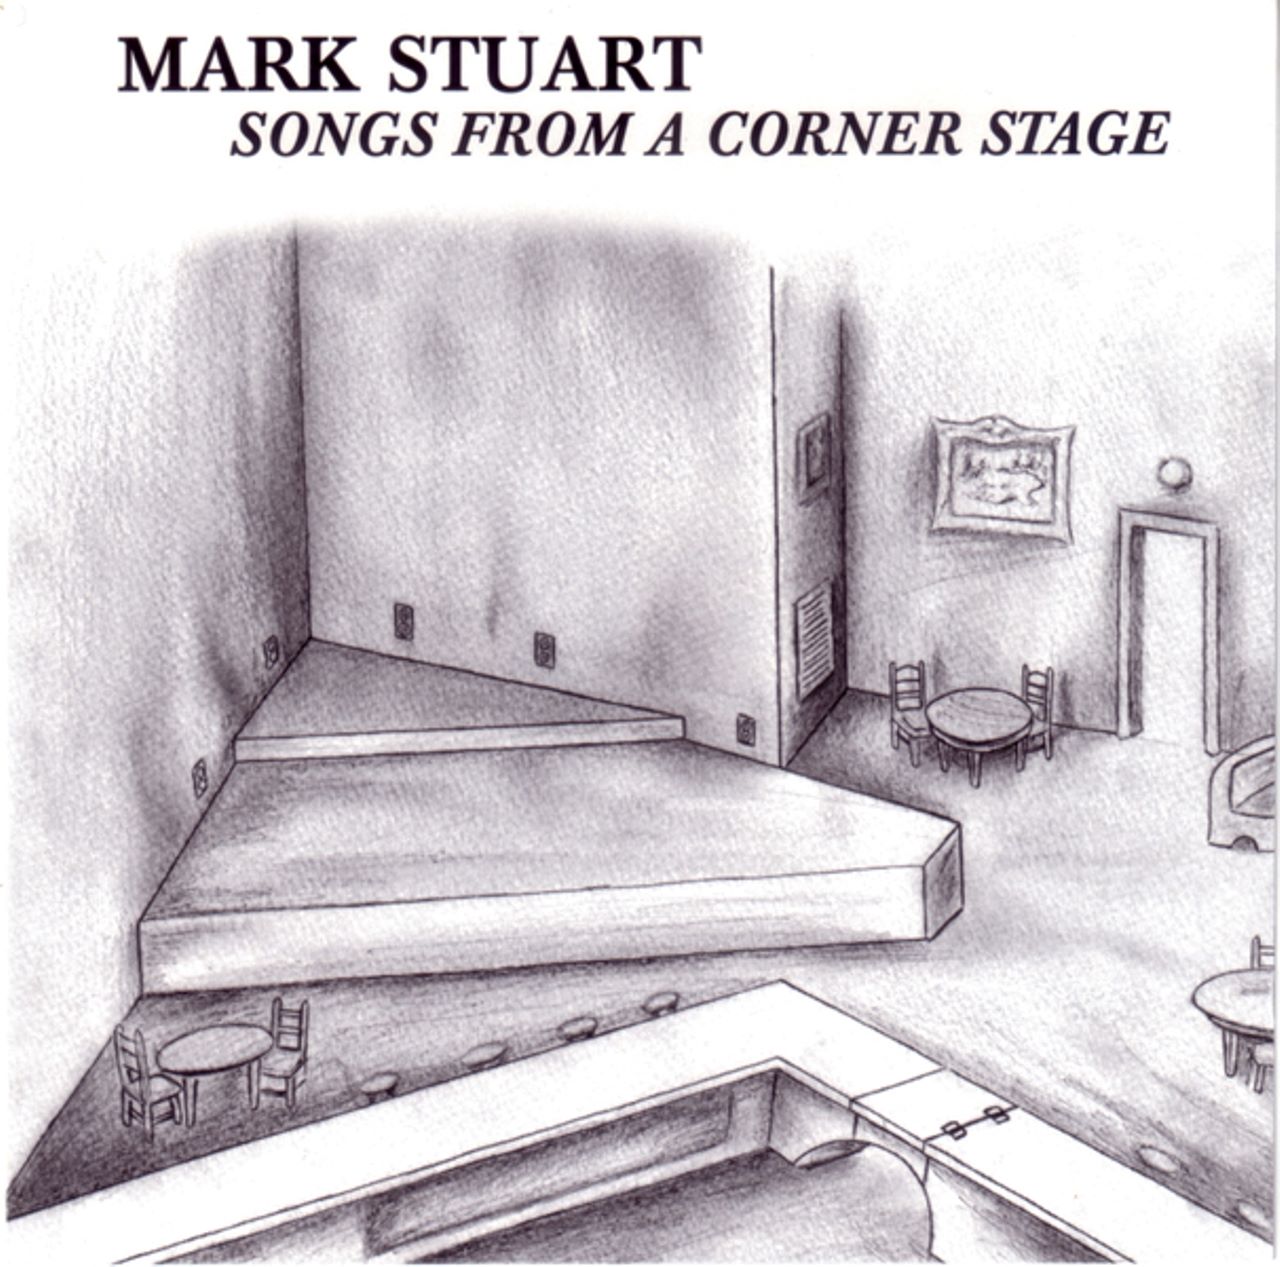 Mark Stuart - Songs From A Corner Stage cover album